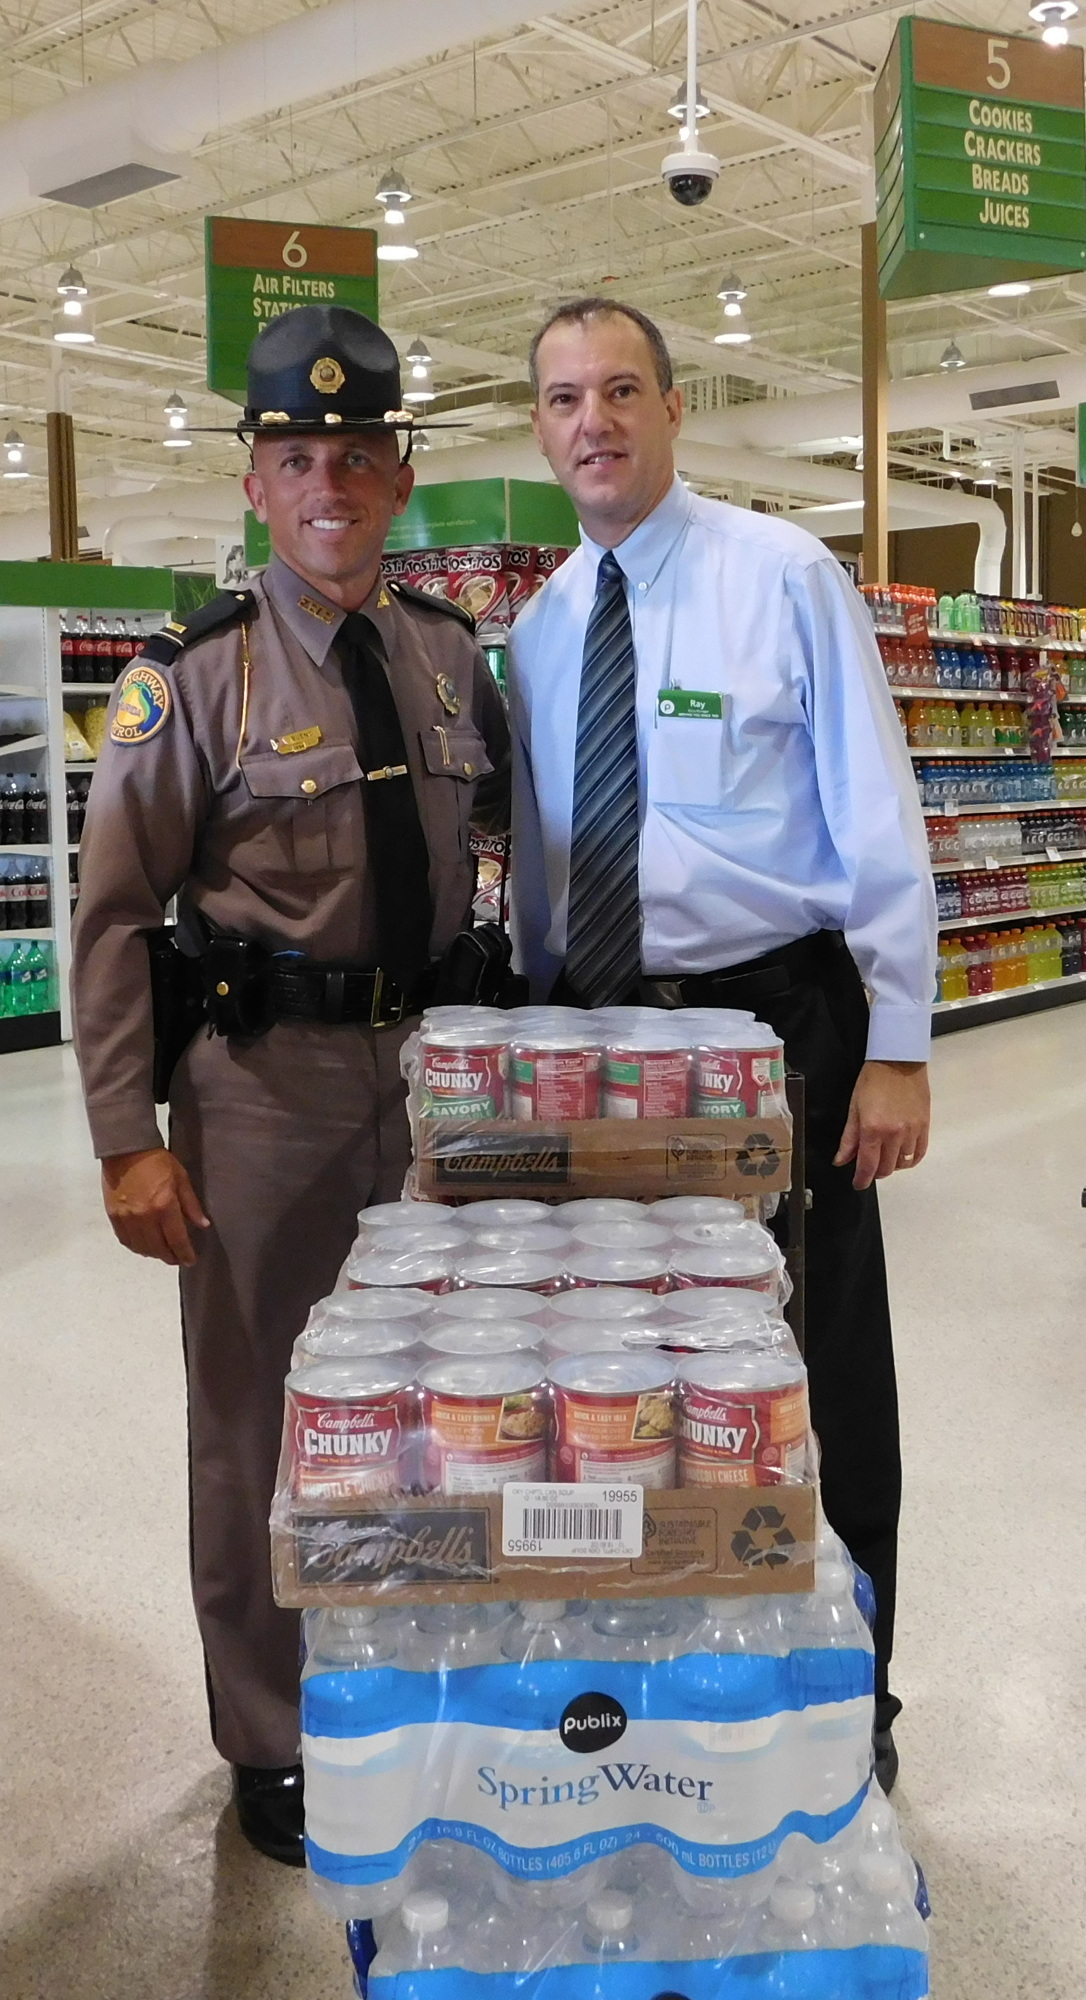 Lt. Gregory Bueno and Publix manager Ray Gonzalez. Photo courtesy of Lt. Gregory Bueno.